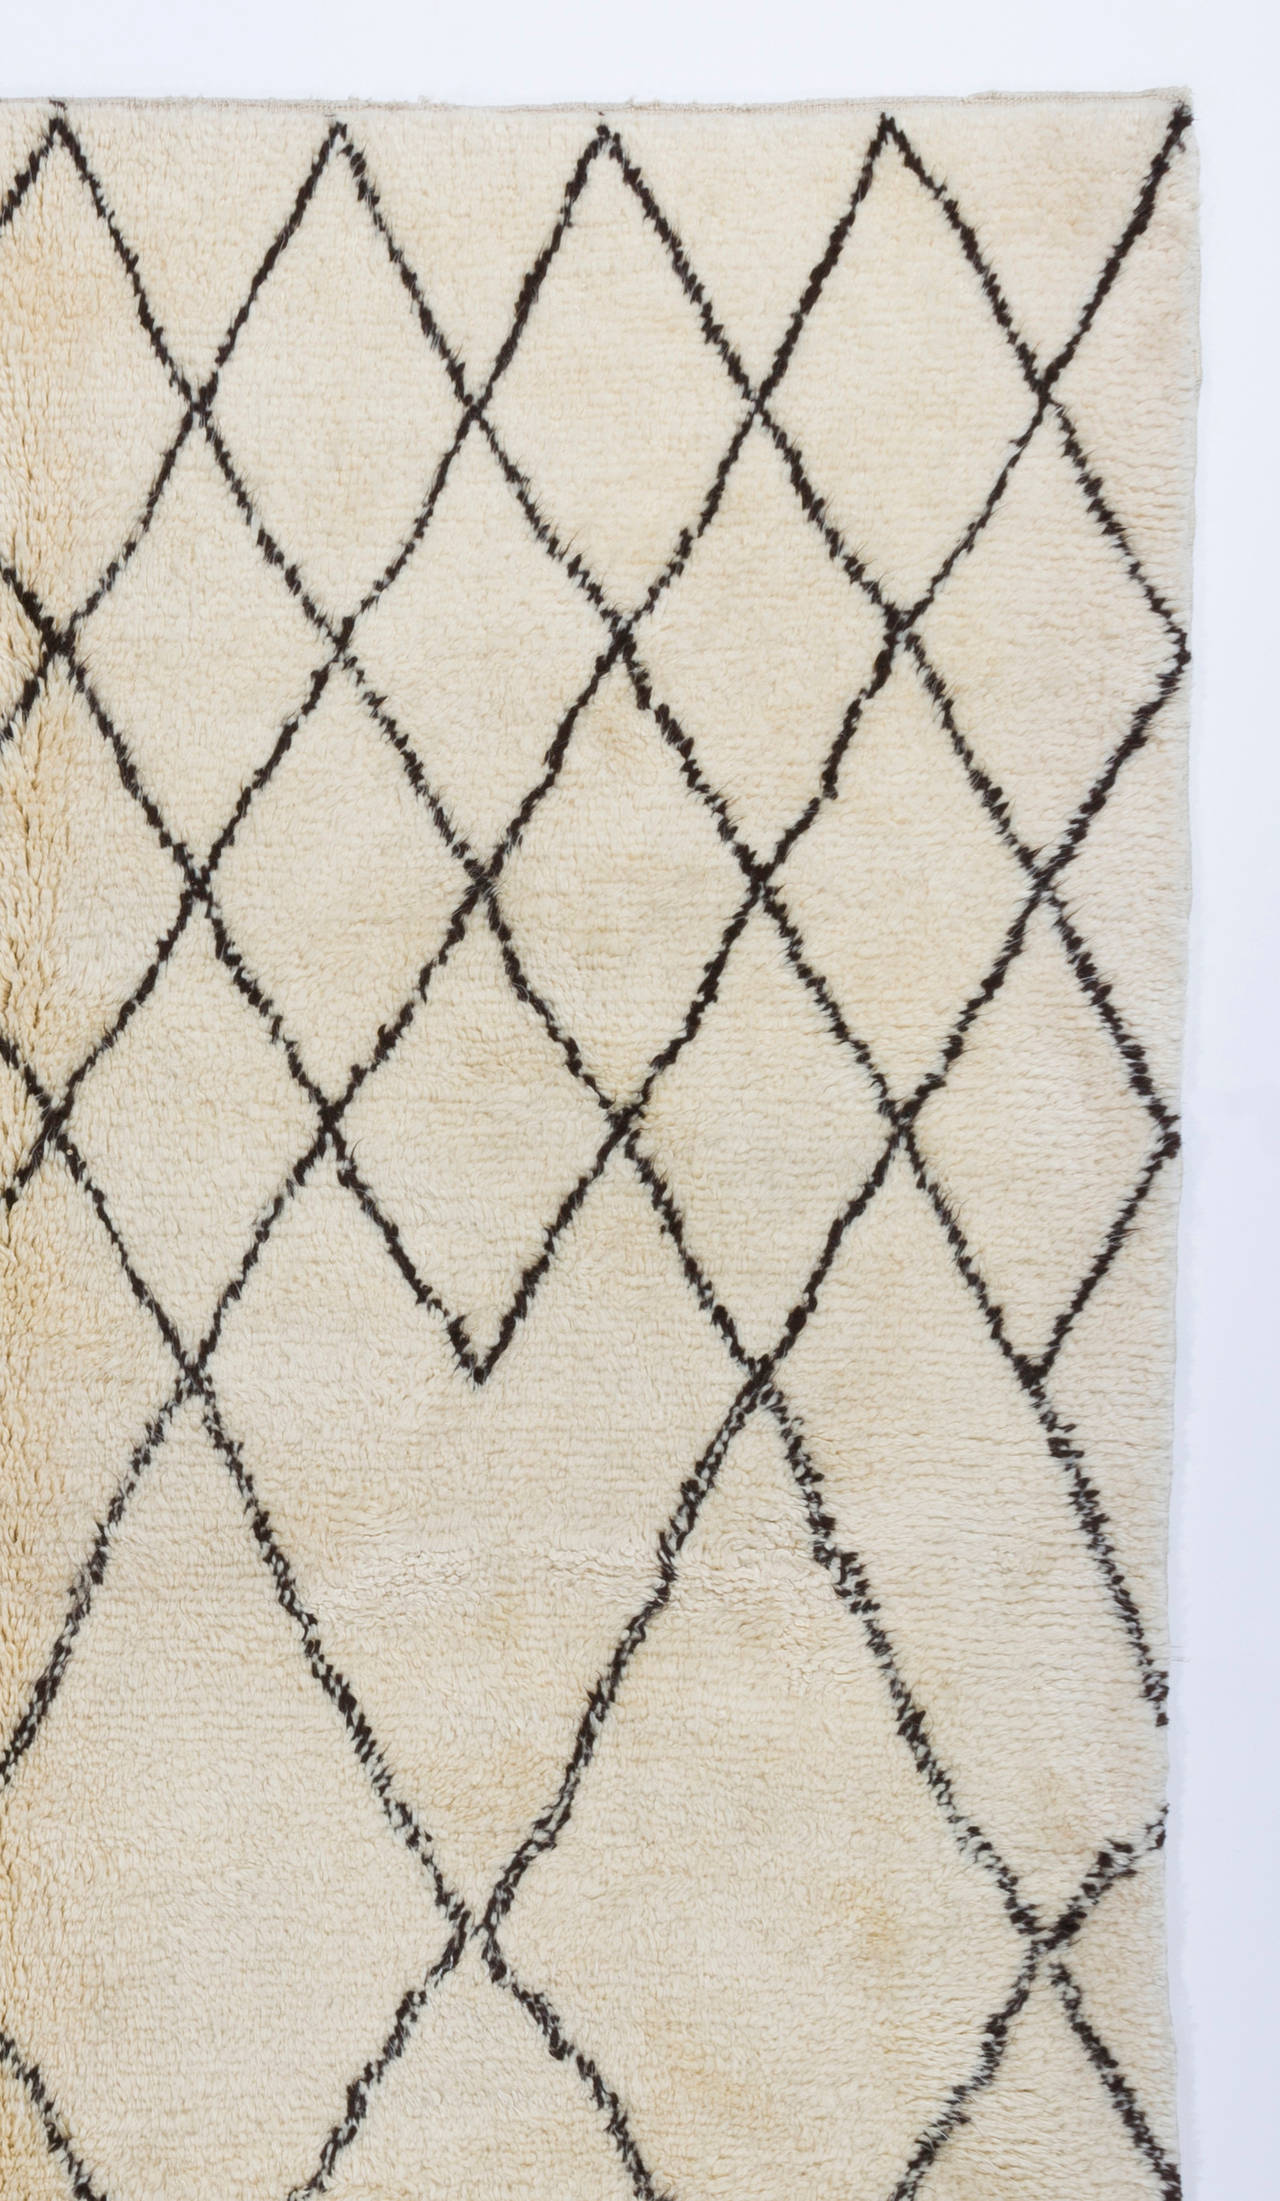 A contemporary handmade Moroccan rug with thick soft pile, made of natural undyed ivory/cream and brown wool. Available as it is or can be custom produced in any size and color combination requested.